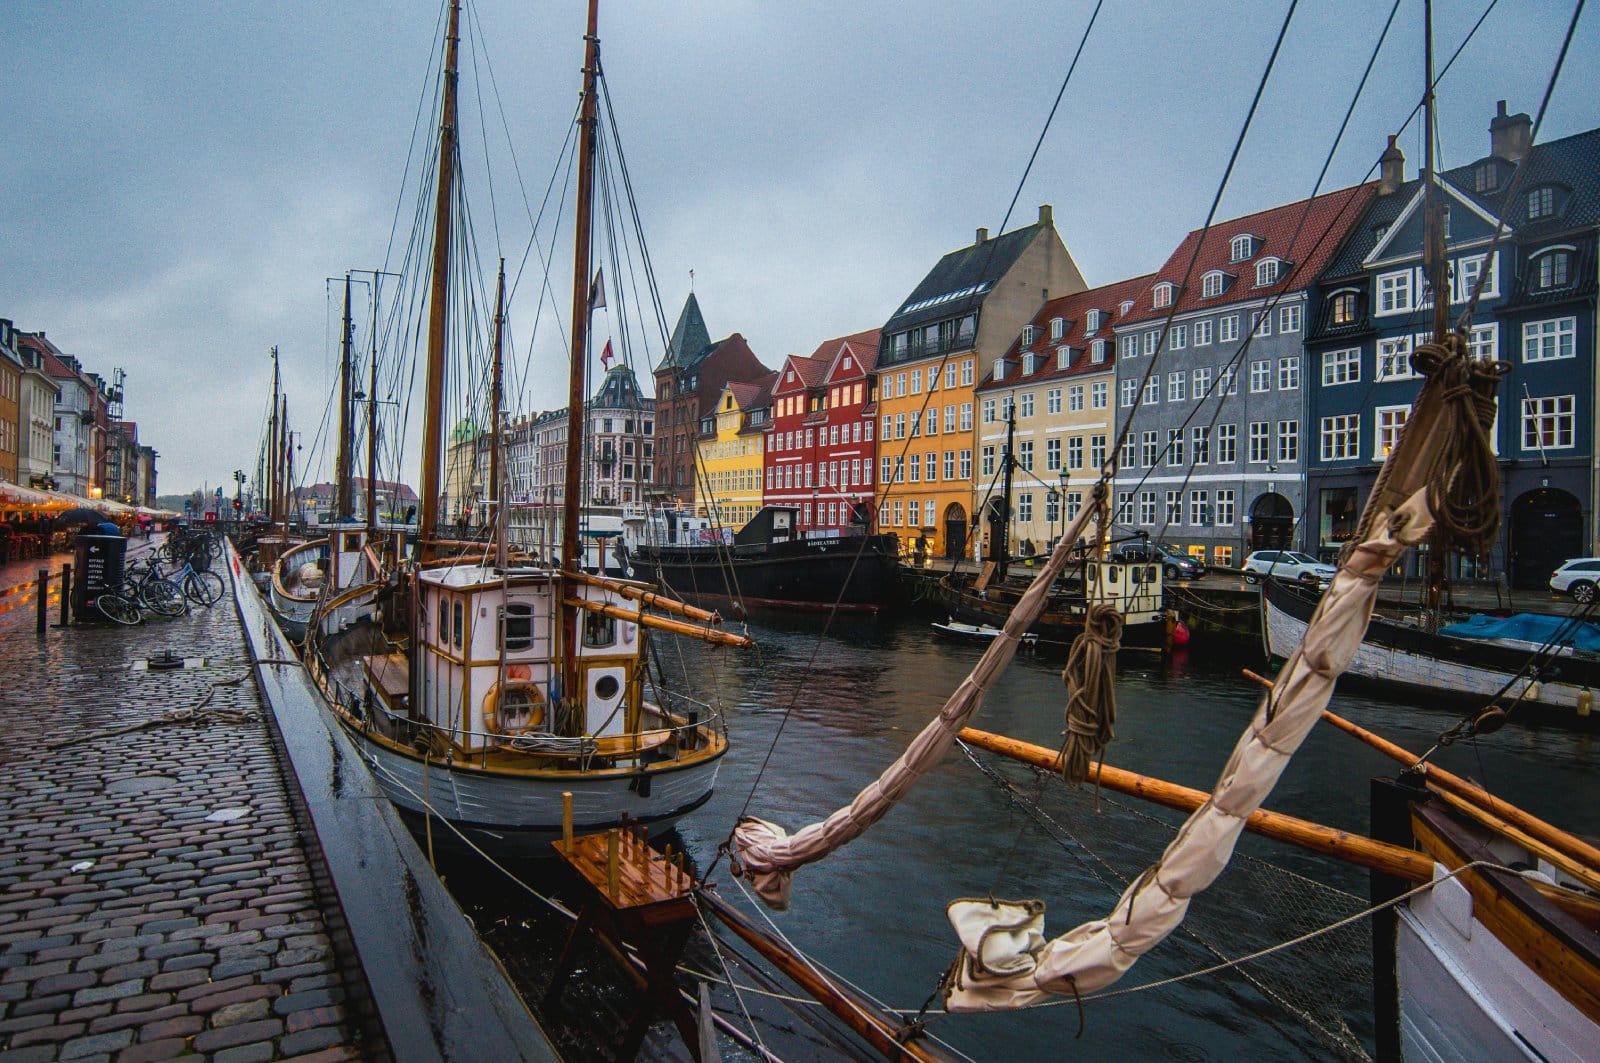 Image Credit: Pexels / Daniel Jurin <p><span>Copenhagen is famed for its design, gastronomy, and as a pioneer in LGBTQ+ rights. The city’s historic LGBTQ+ district, centered around Studiestræde, offers a mix of bars, cafes, and shops. In August, Copenhagen Pride showcases the city’s commitment to LGBTQ+ rights with a week-long celebration. Moreover, Copenhagen is set to host WorldPride in 2021, underlining its status as a leading LGBTQ+ destination. The city’s bike-friendly streets, green spaces, and historic landmarks, including the Tivoli Gardens and Nyhavn, add to its charm.</span></p> <p><b>Insider’s Tip: </b><span>Explore the city by bike to discover hidden gems and local favorites beyond the LGBTQ+ district, blending in with Copenhagen’s environmentally-conscious lifestyle.</span></p> <p><b>When to Travel: </b><span>August for Copenhagen Pride is vibrant, but the city’s inclusive atmosphere and cultural offerings are accessible throughout the year.</span></p> <p><b>How to Get There: </b><span>Copenhagen Airport is Scandinavia’s major hub, with the city center just a short metro or train ride away.</span></p>